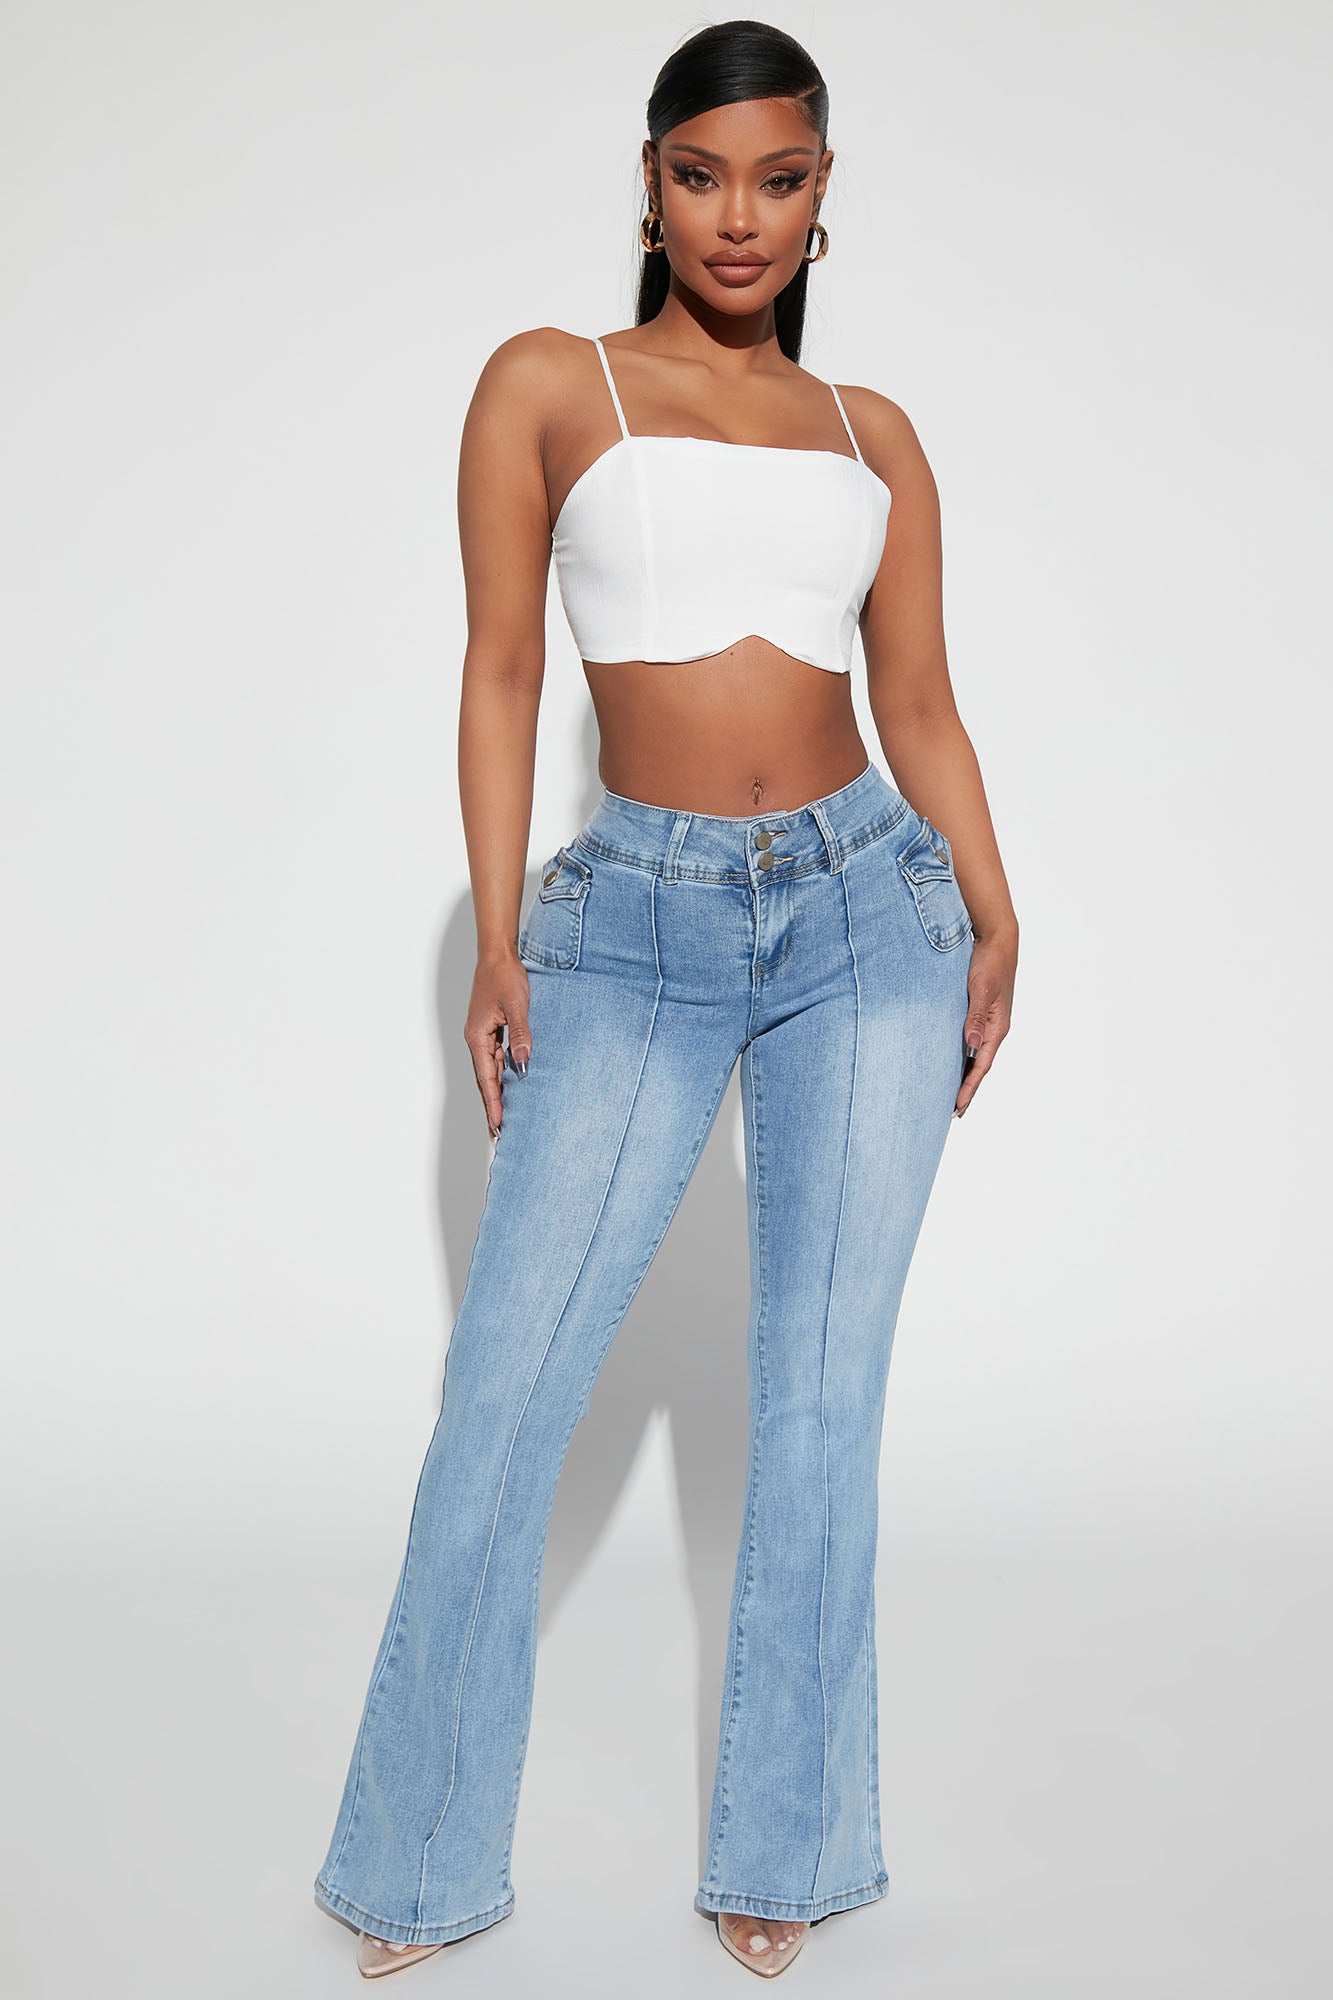 Something Missing Low Rise Flare Jeans - Light Blue Wash